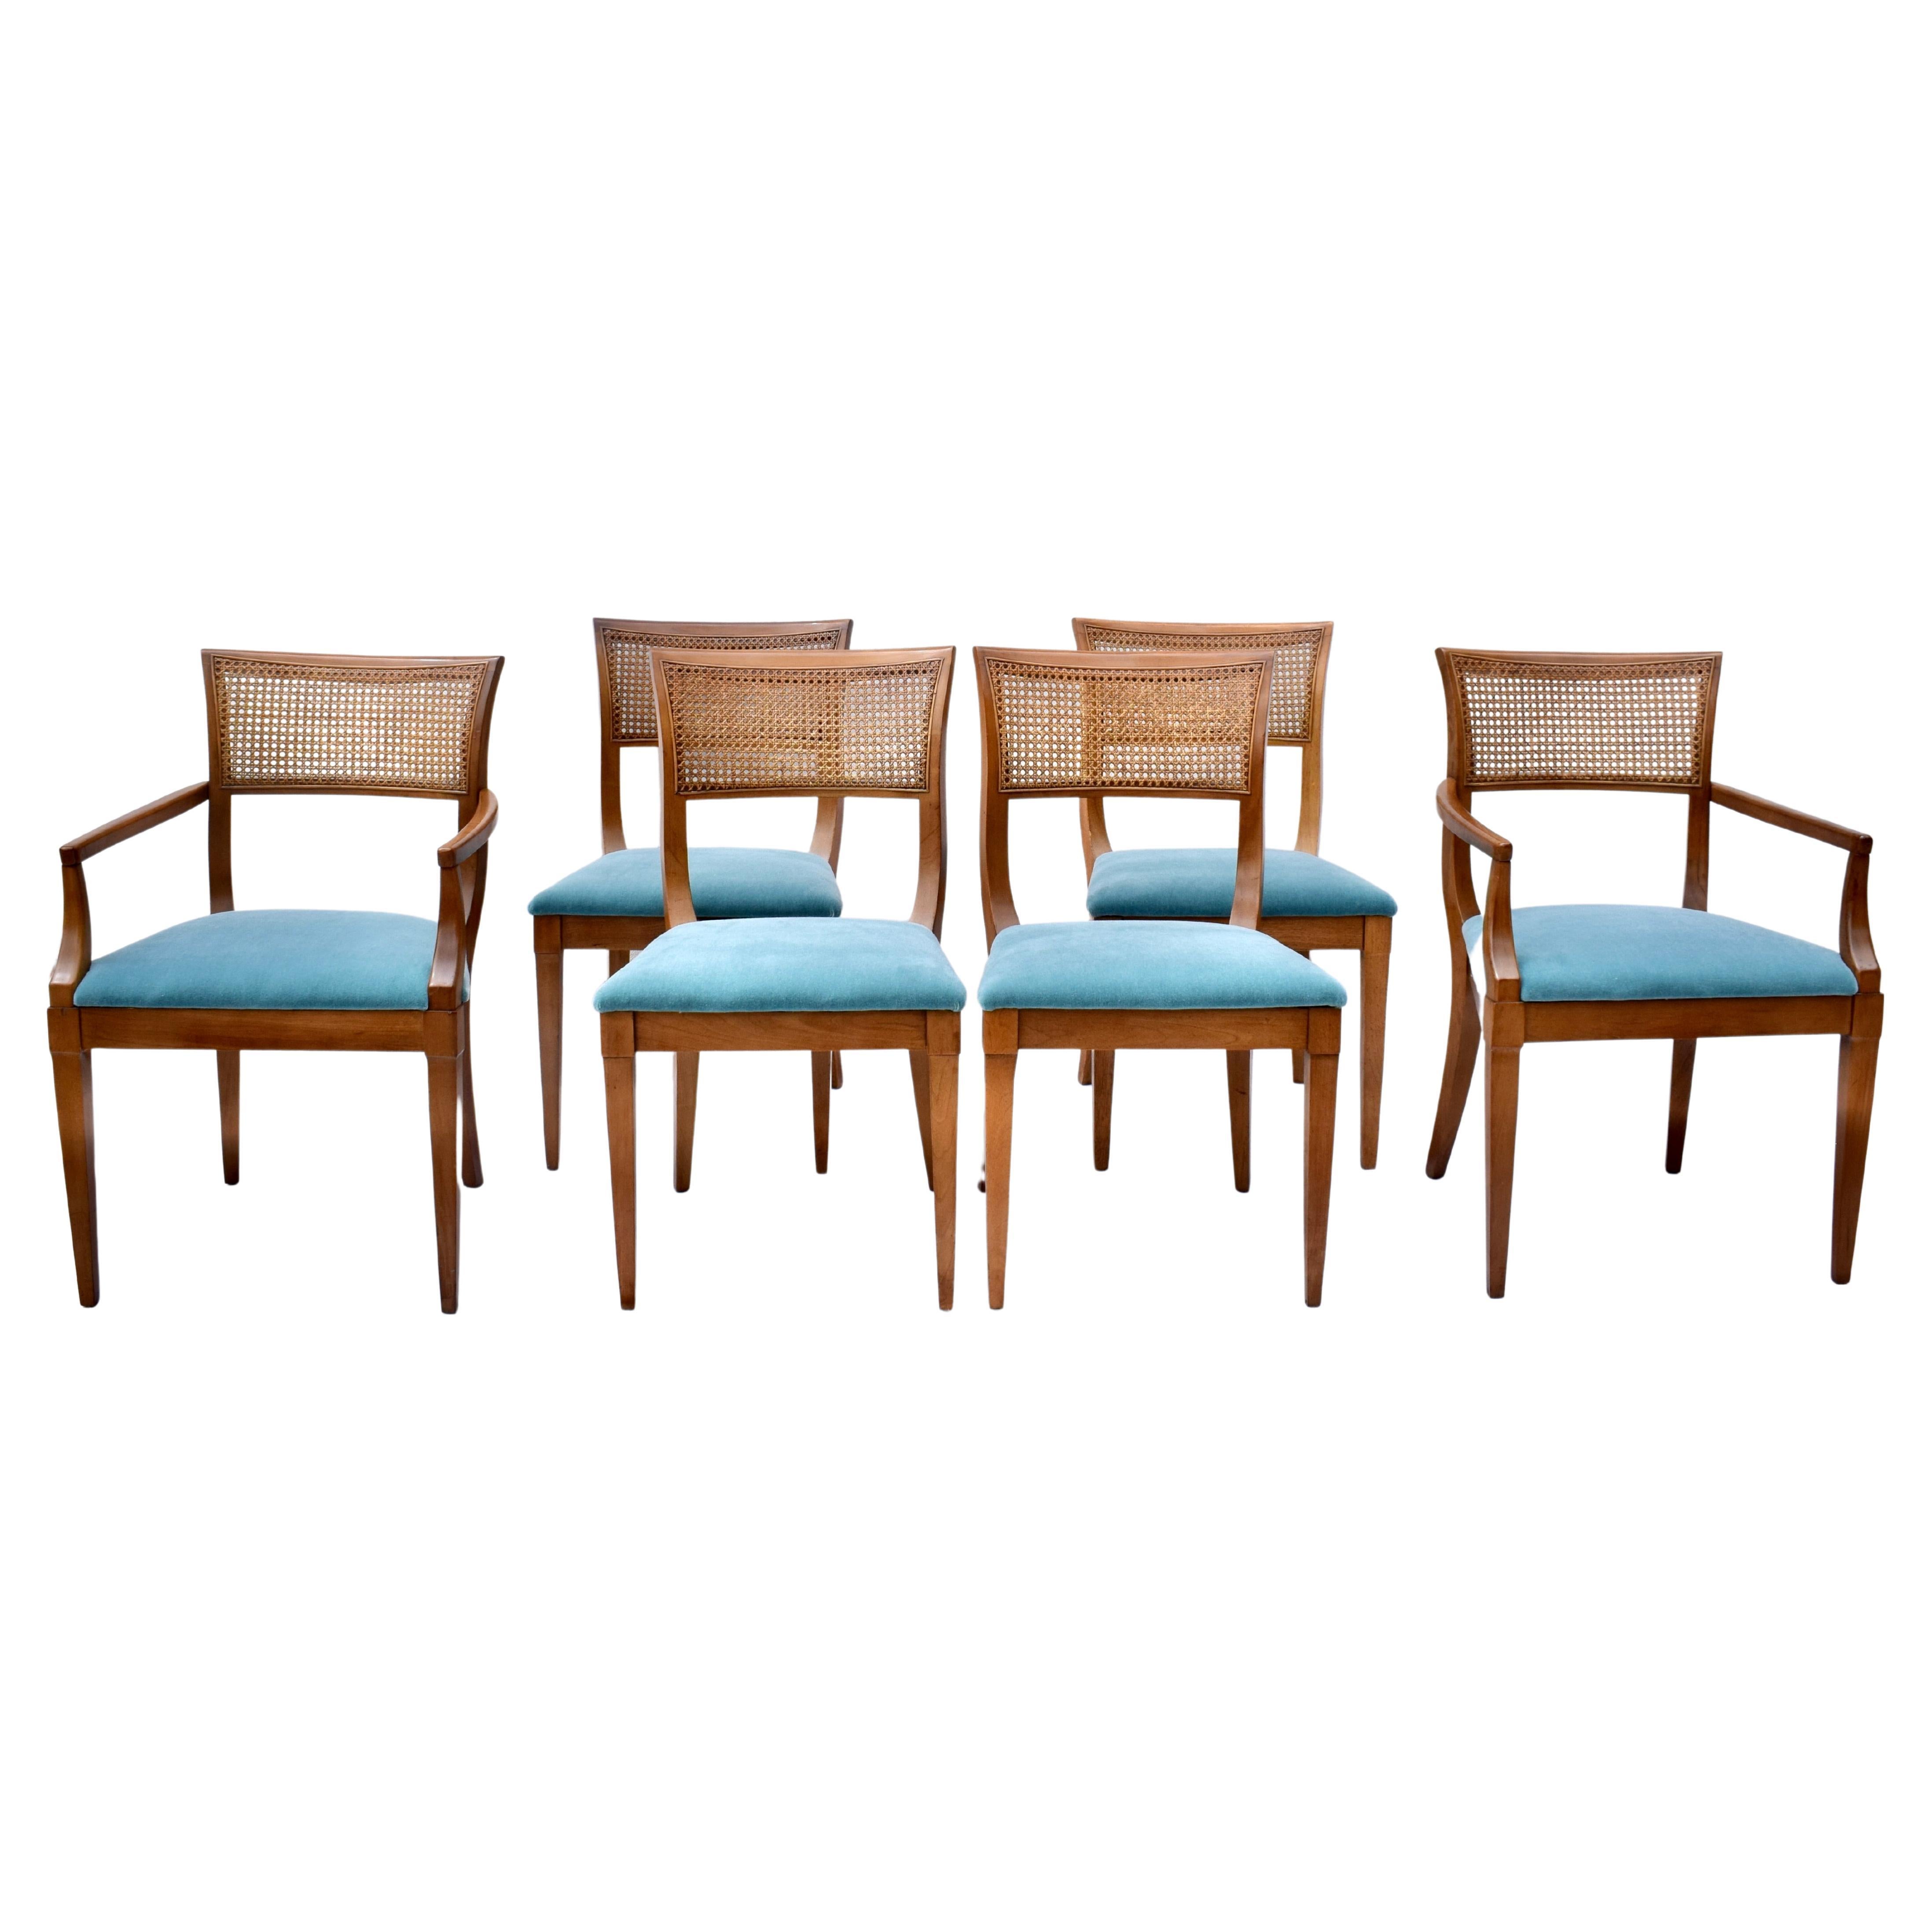 American Regency Style Caned Back Dining Chairs in Teal Mohair